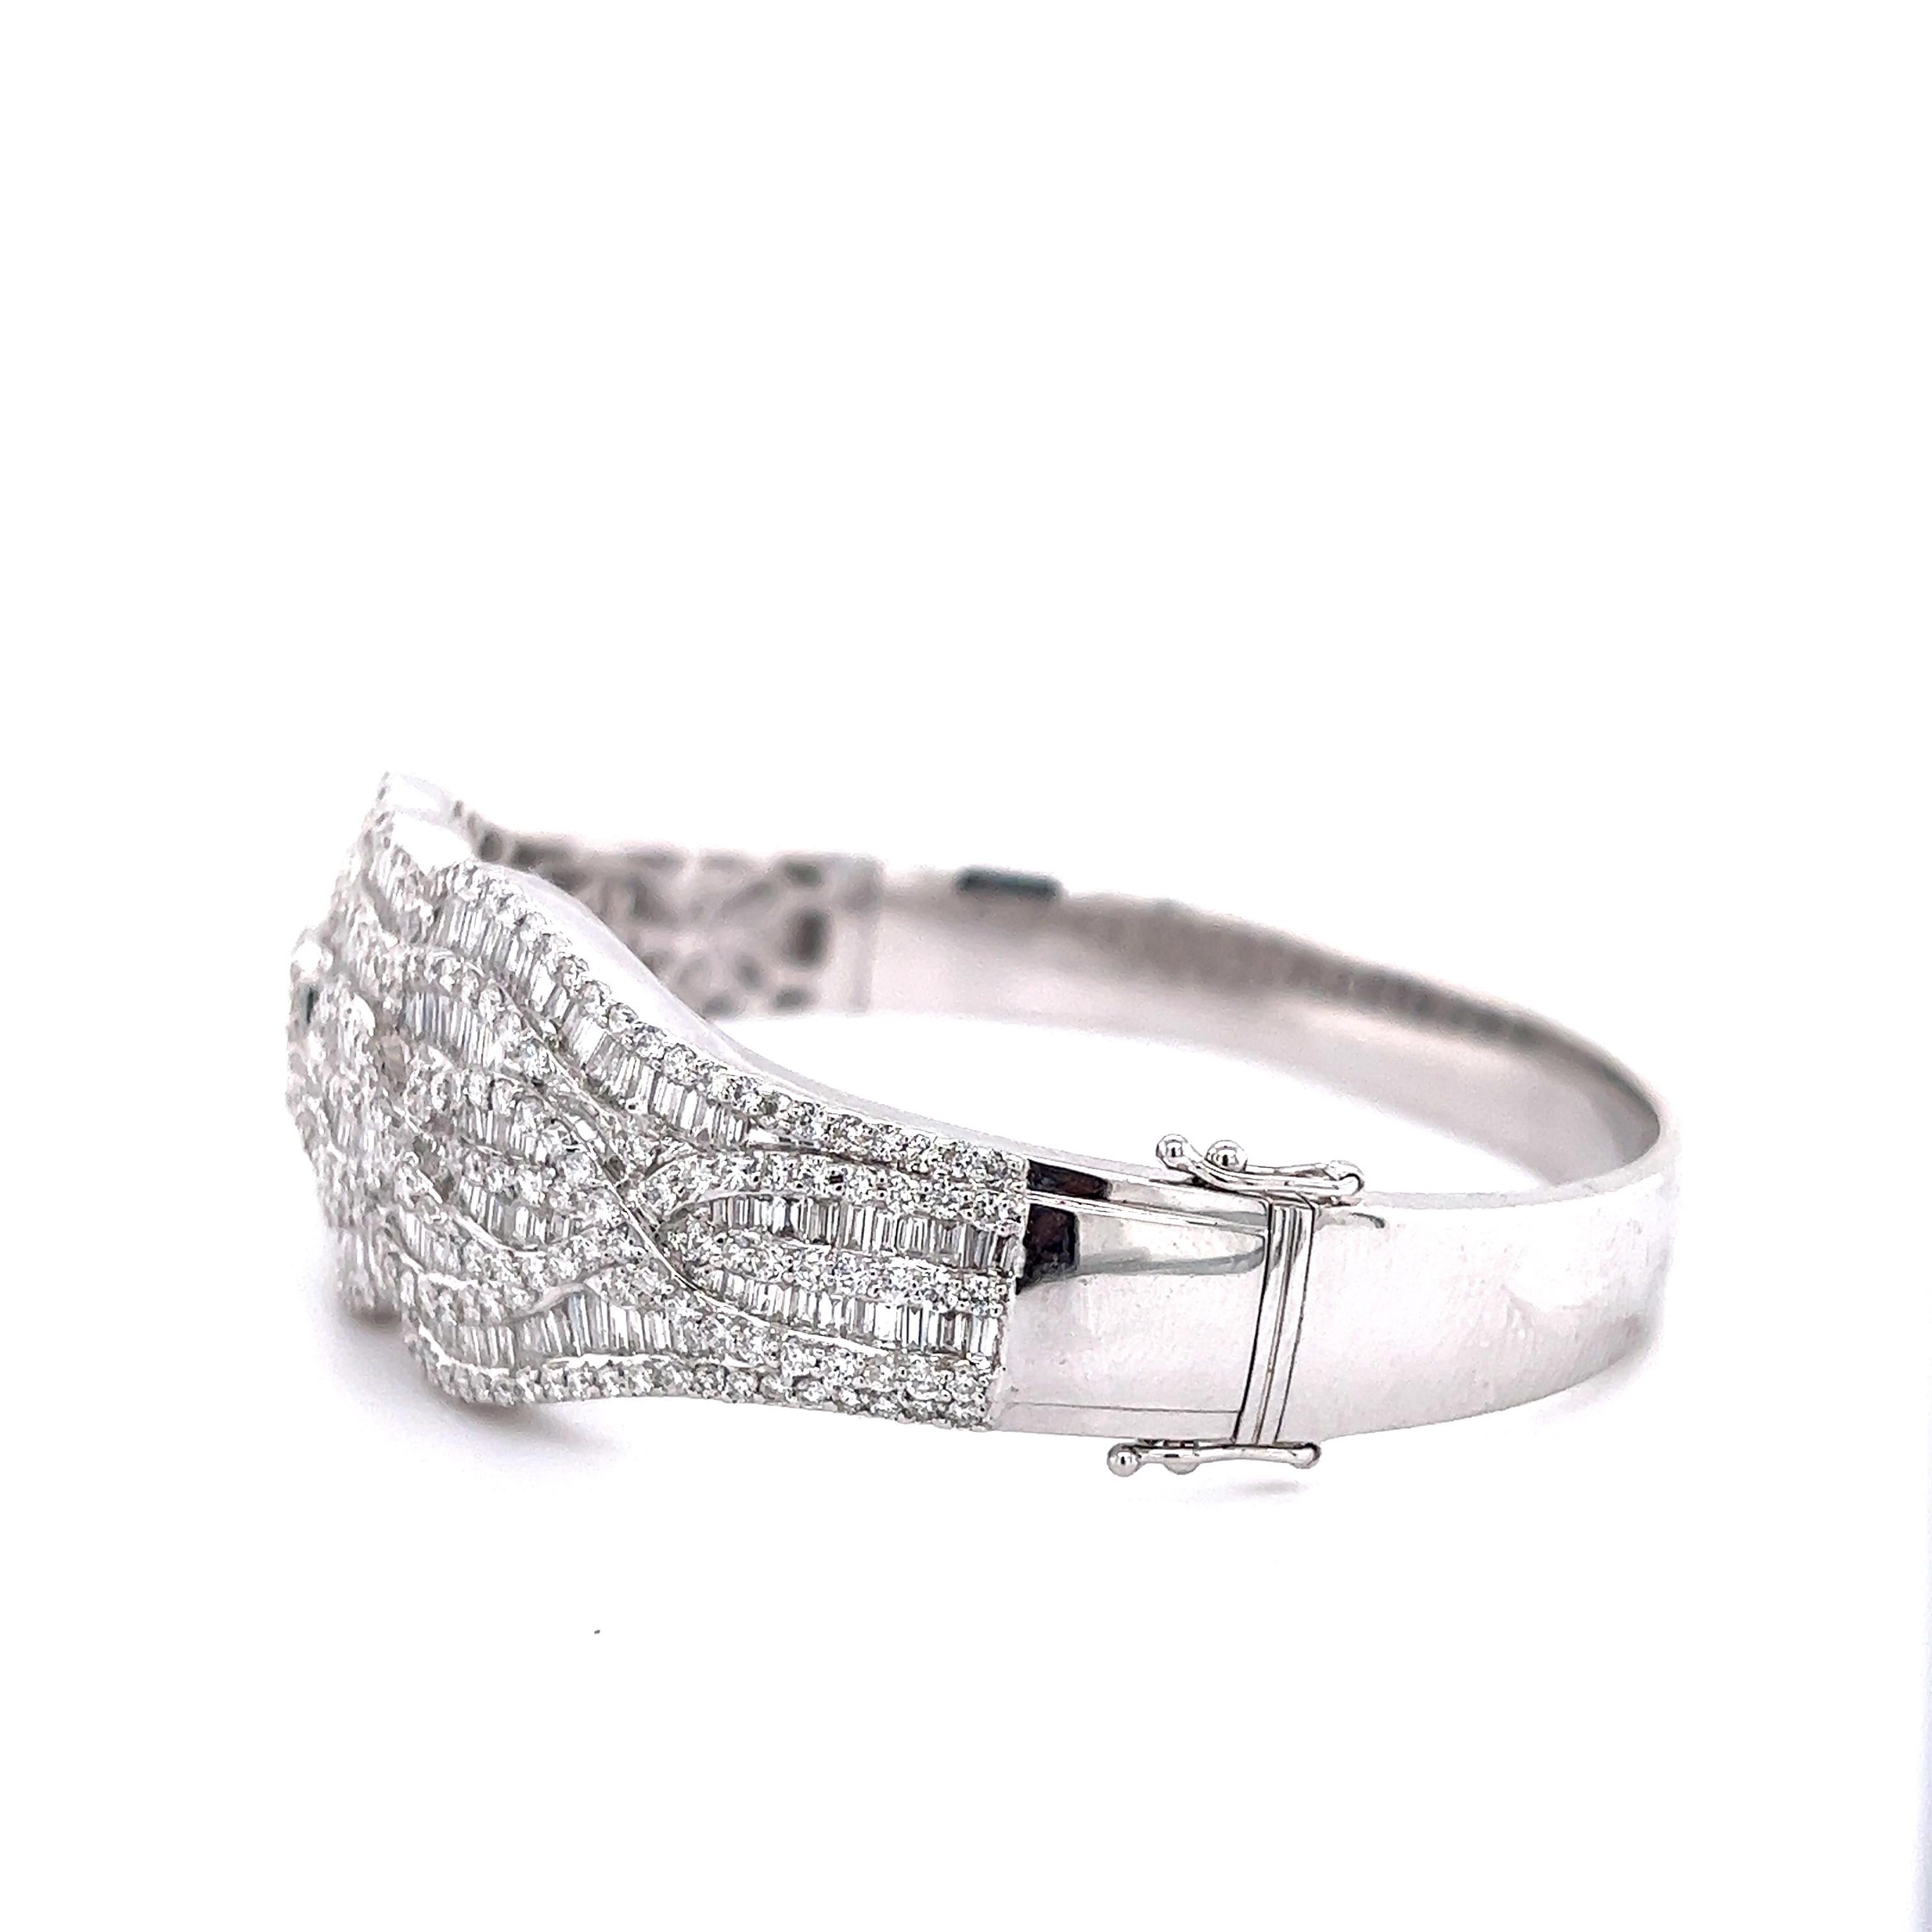 Gorgeous diamond cuff bracelet crafted in 18k white gold. The design is set with over 15.01 ct. of round brilliant cut & baguette cut earth mined natural diamonds. The cuff shows a whimsical pattern as the diamonds seem to flow endlessly across the